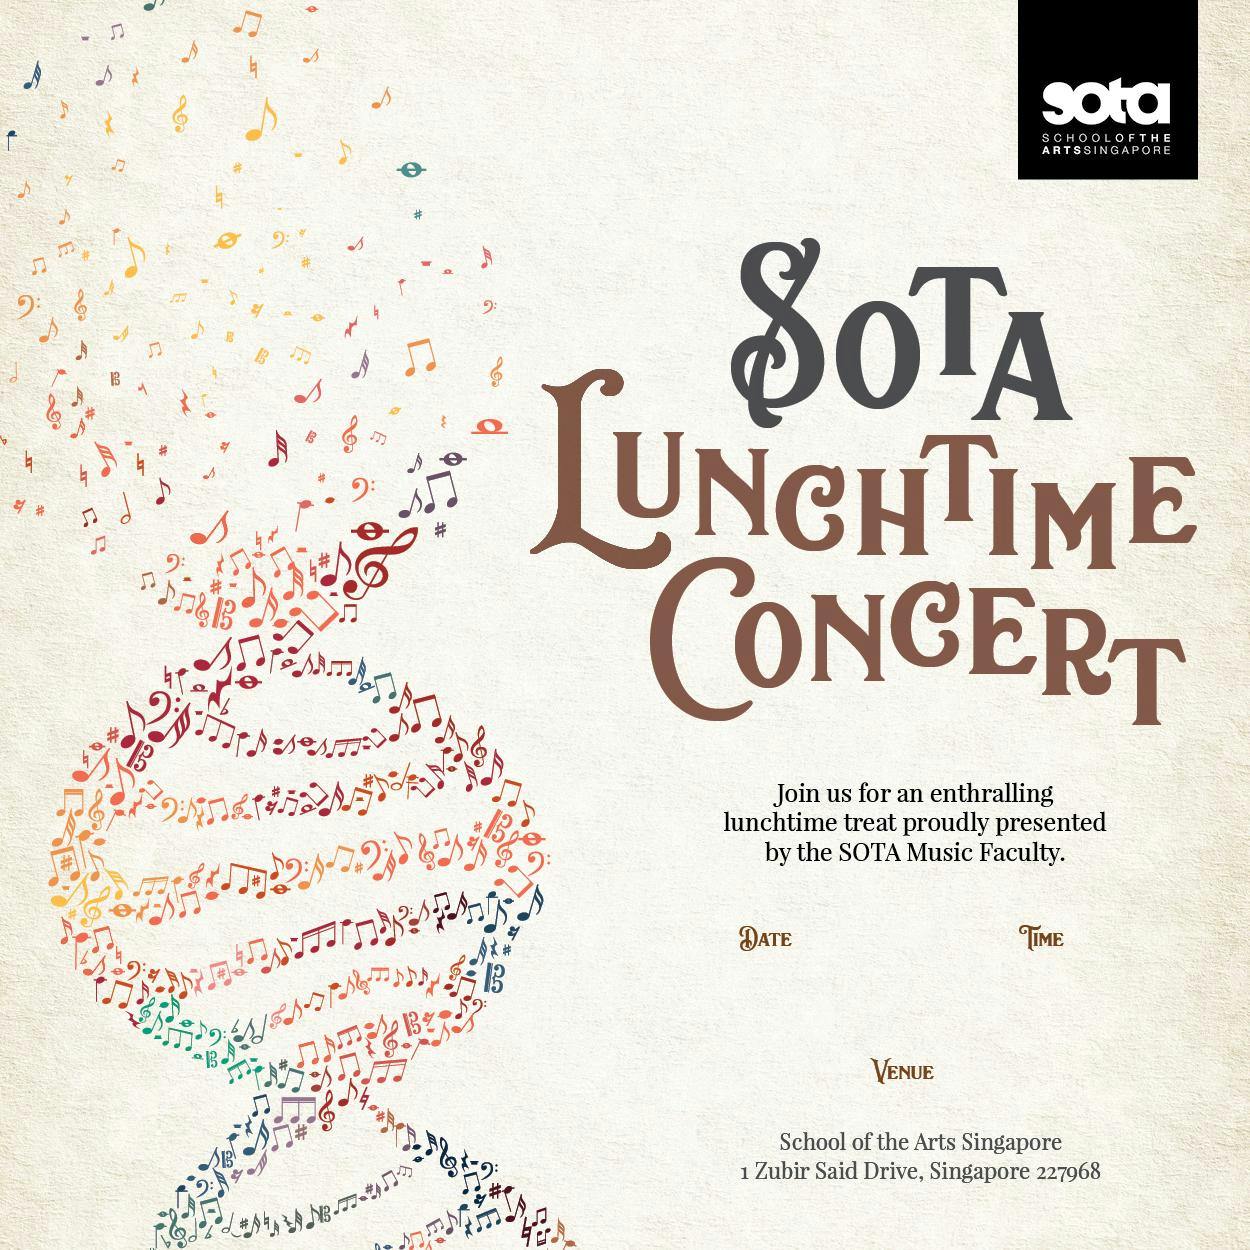 SOTA Lunchtime Concert - 23 Aug 19